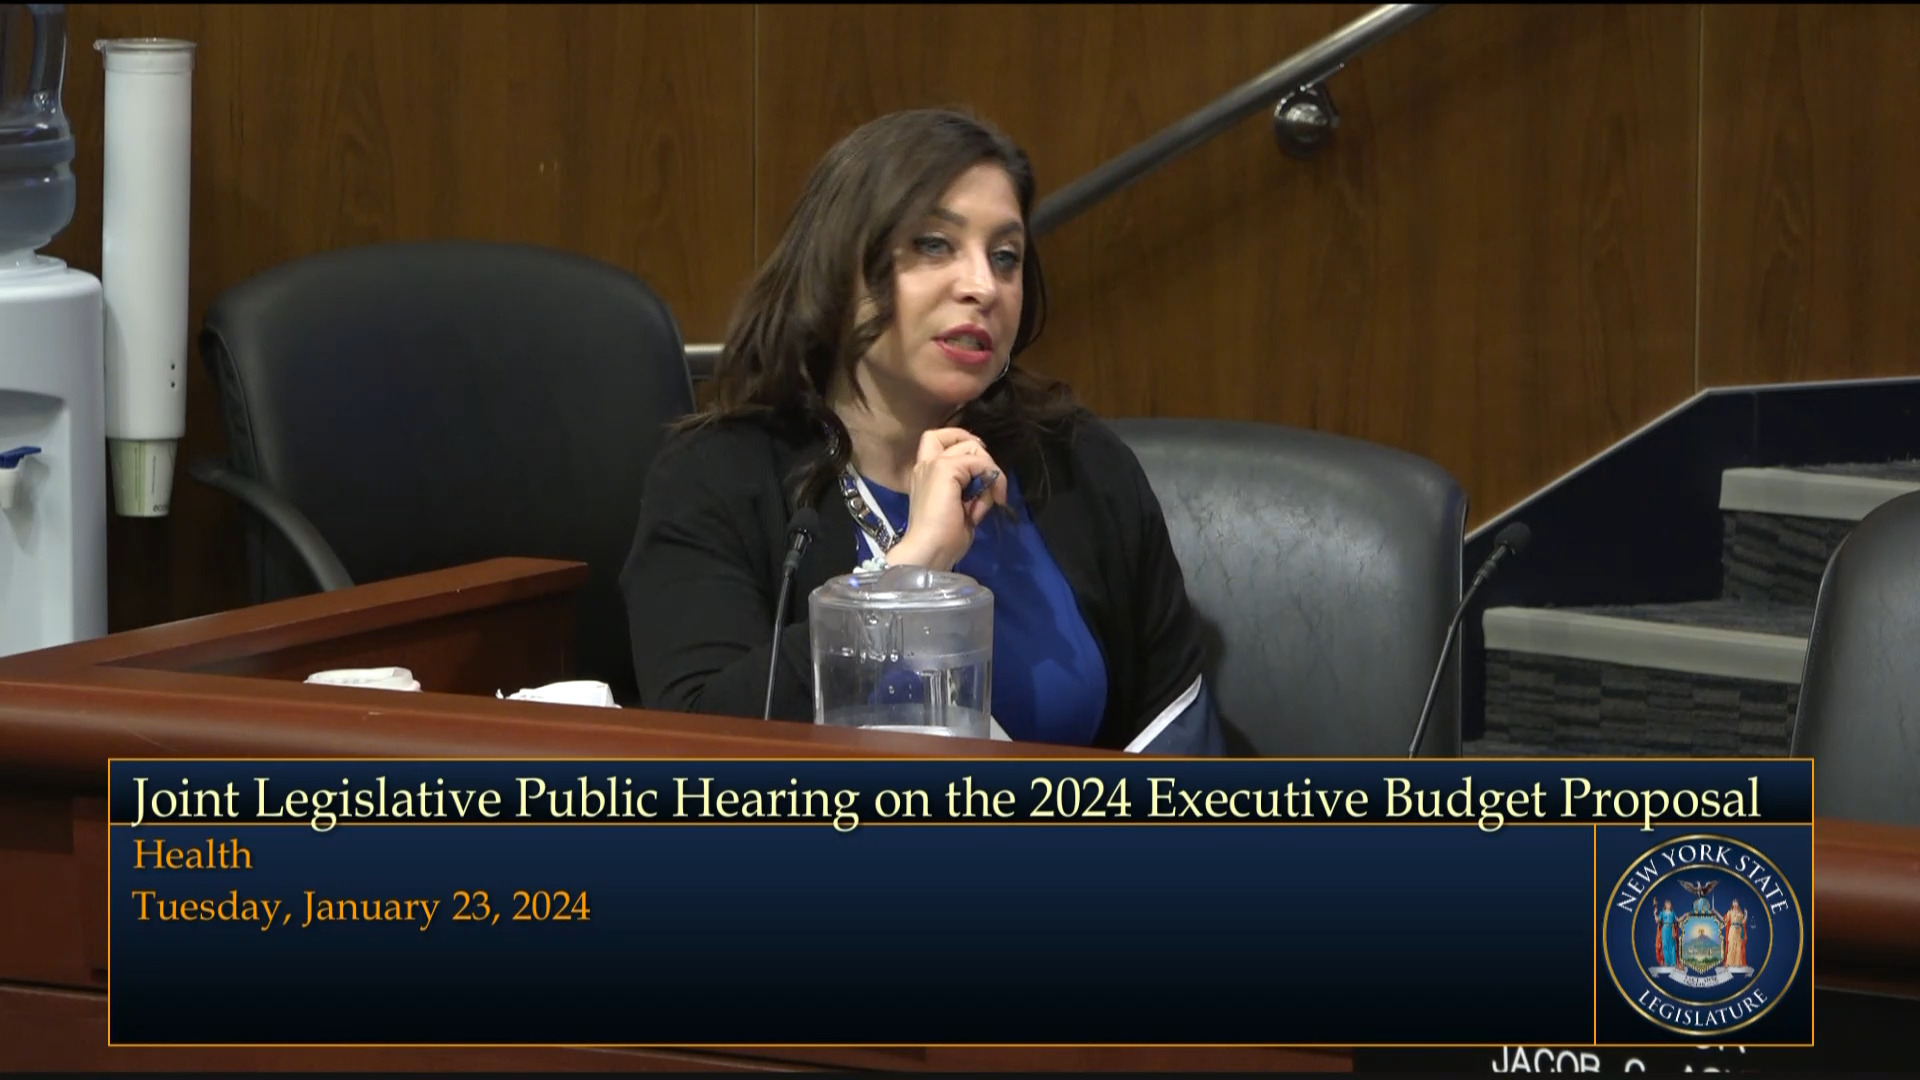 Community Health Care Association President Testifies During Budget Hearing on Health